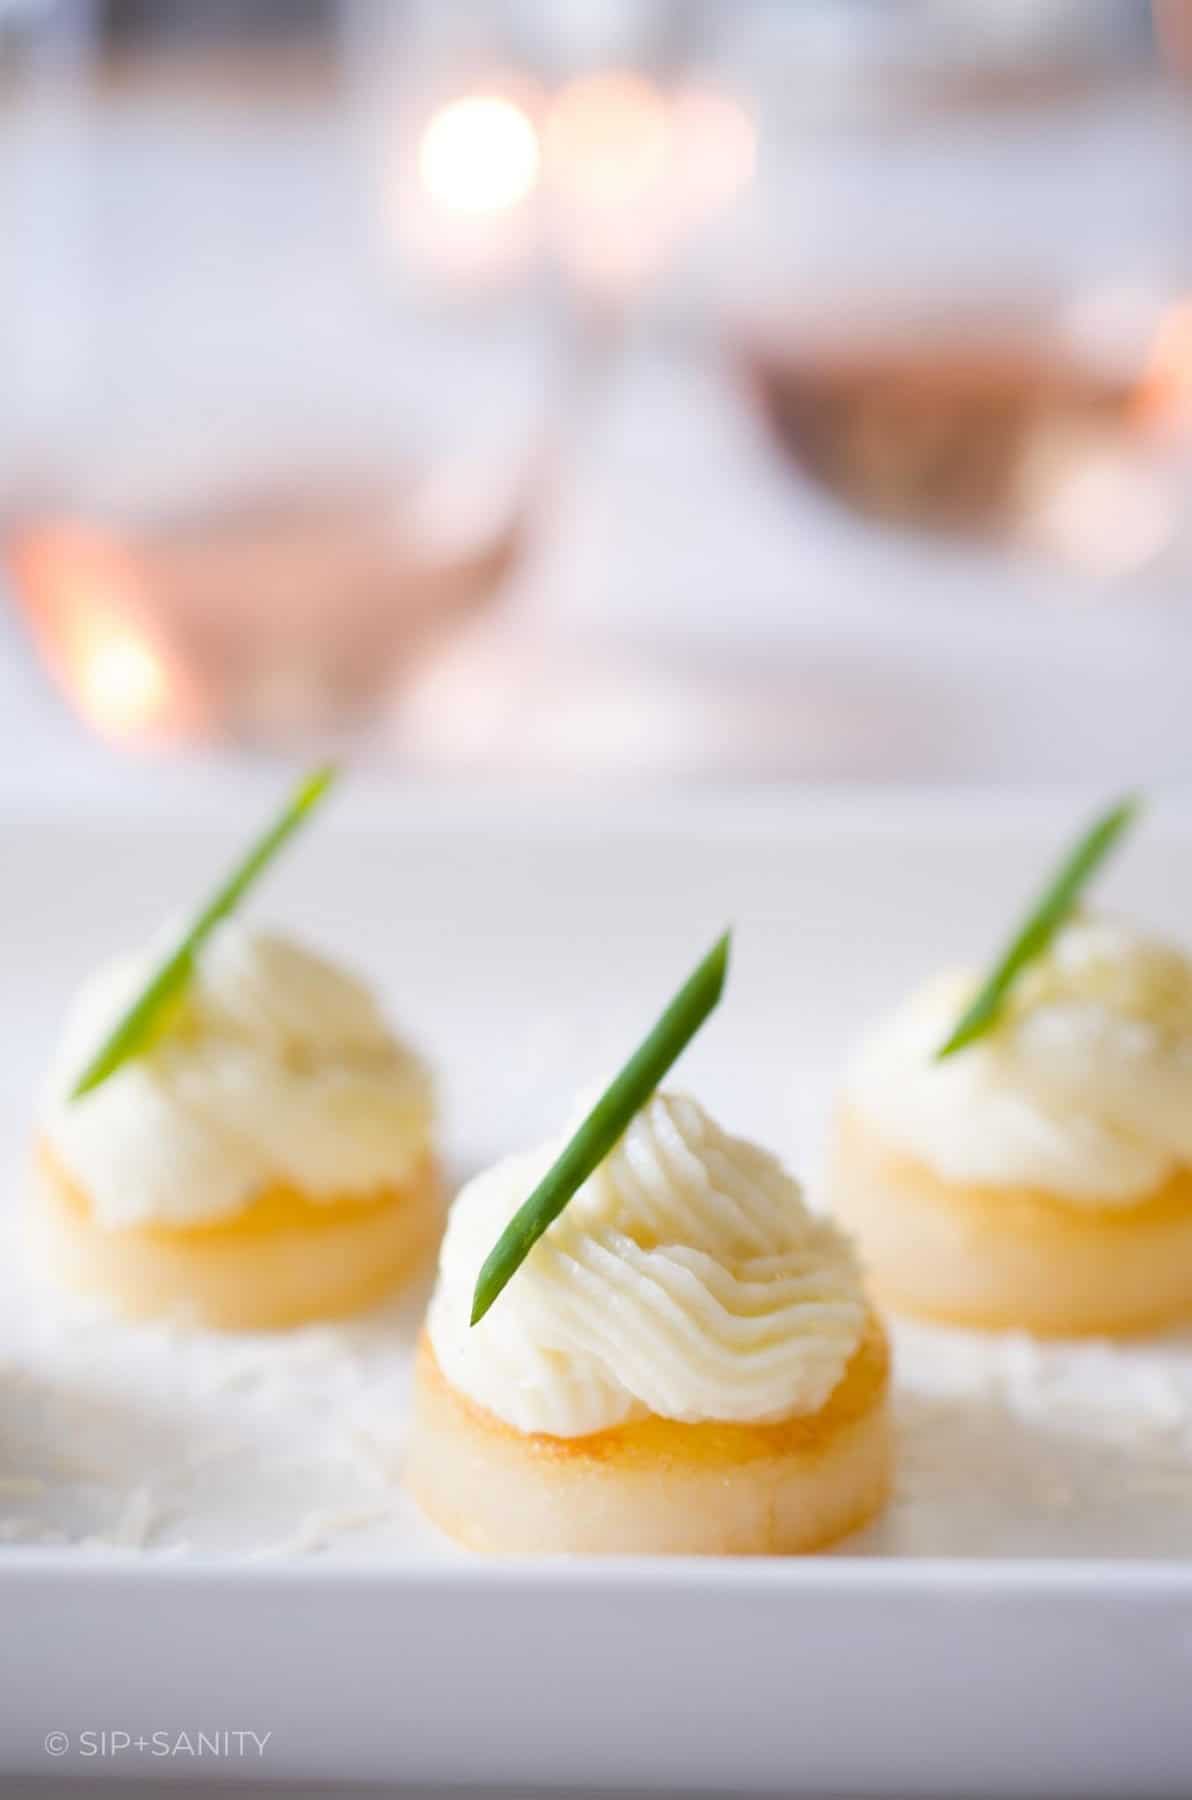 A trio of potato appetizers in front of two glasses of rose wine.